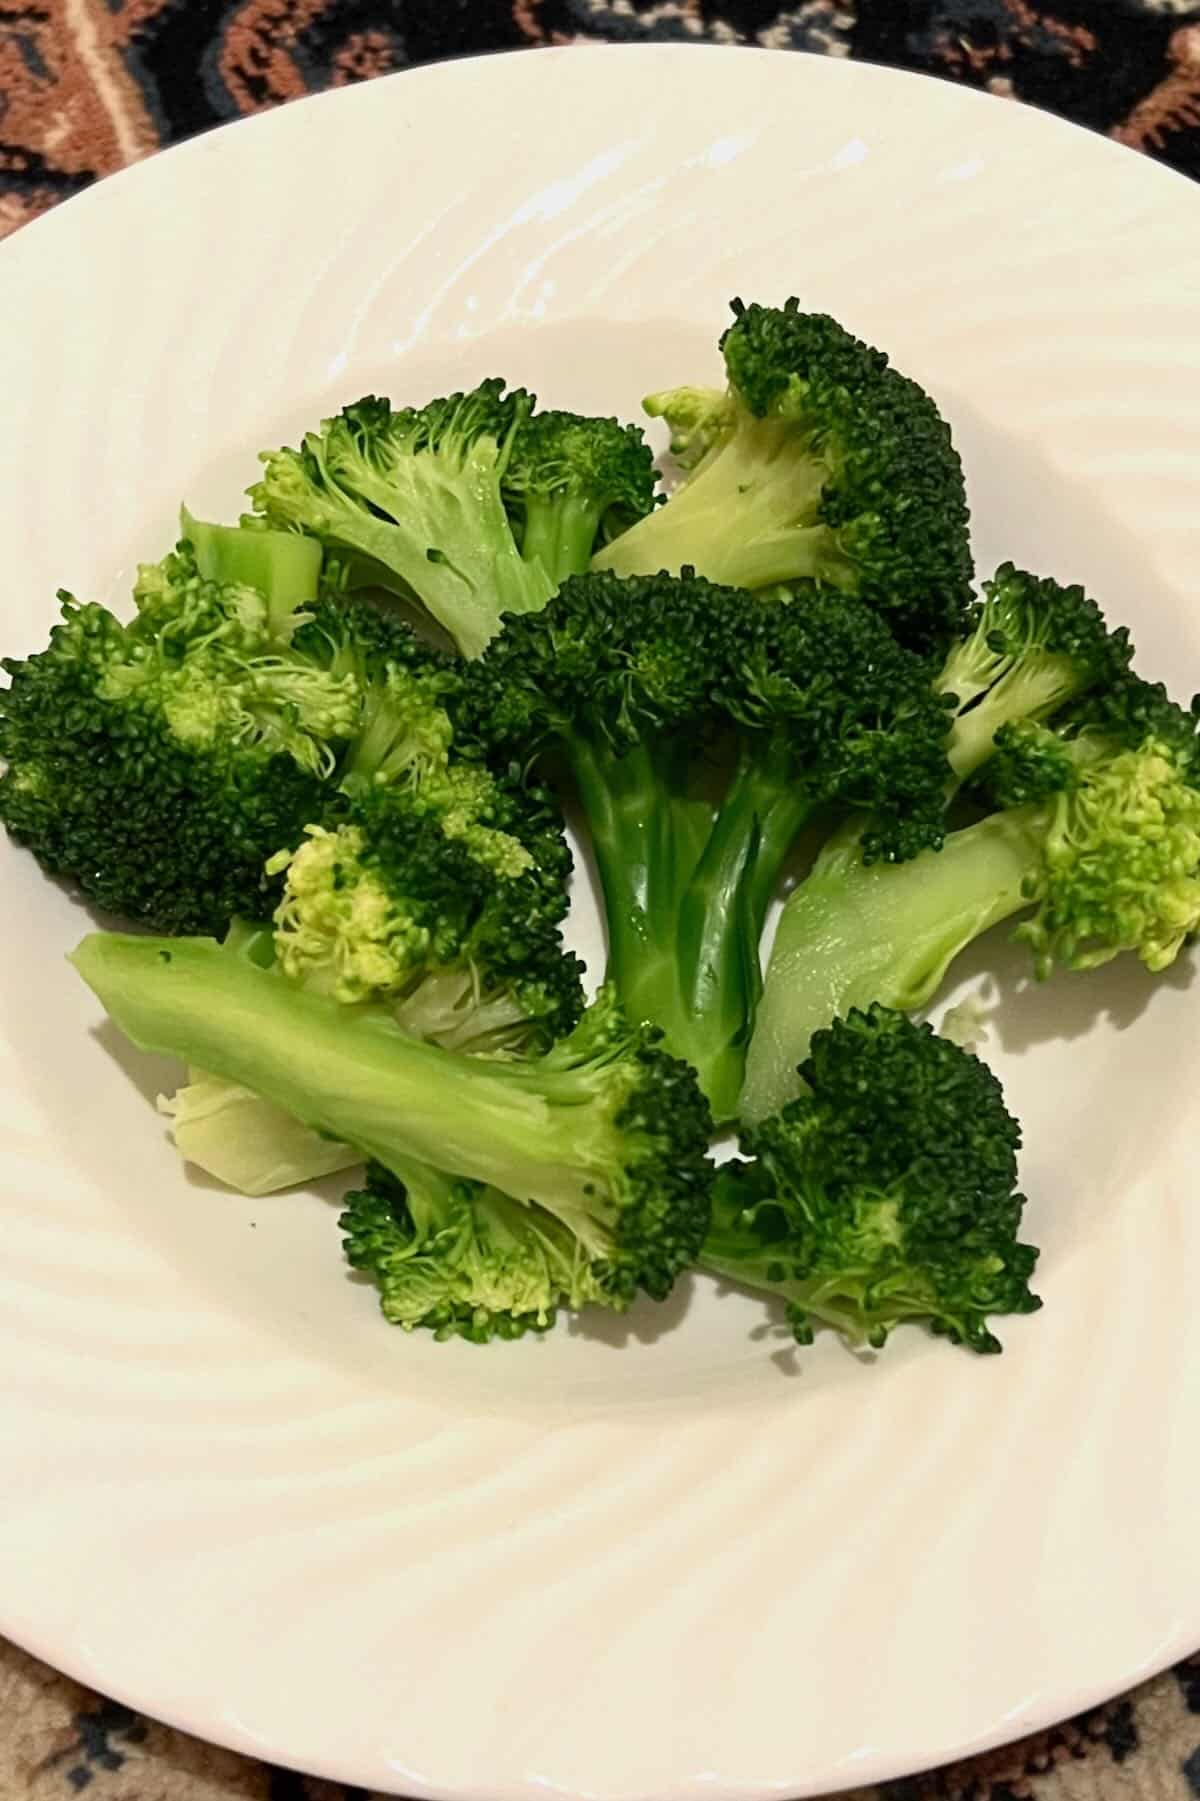 A plate with blanched broccoli